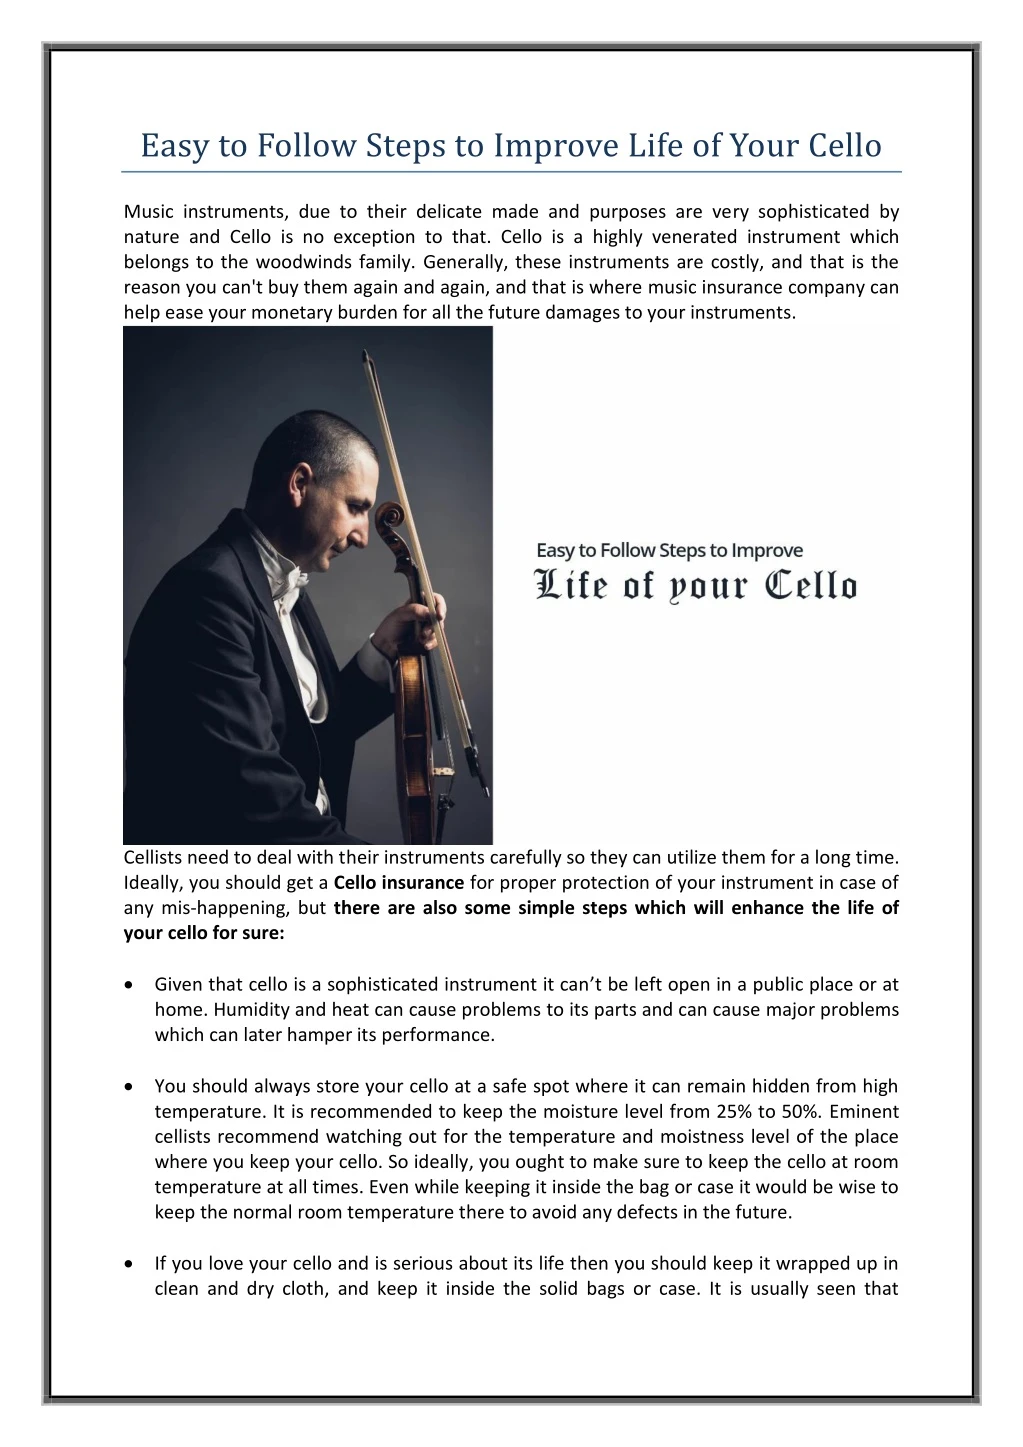 easy to follow steps to improve life of your cello